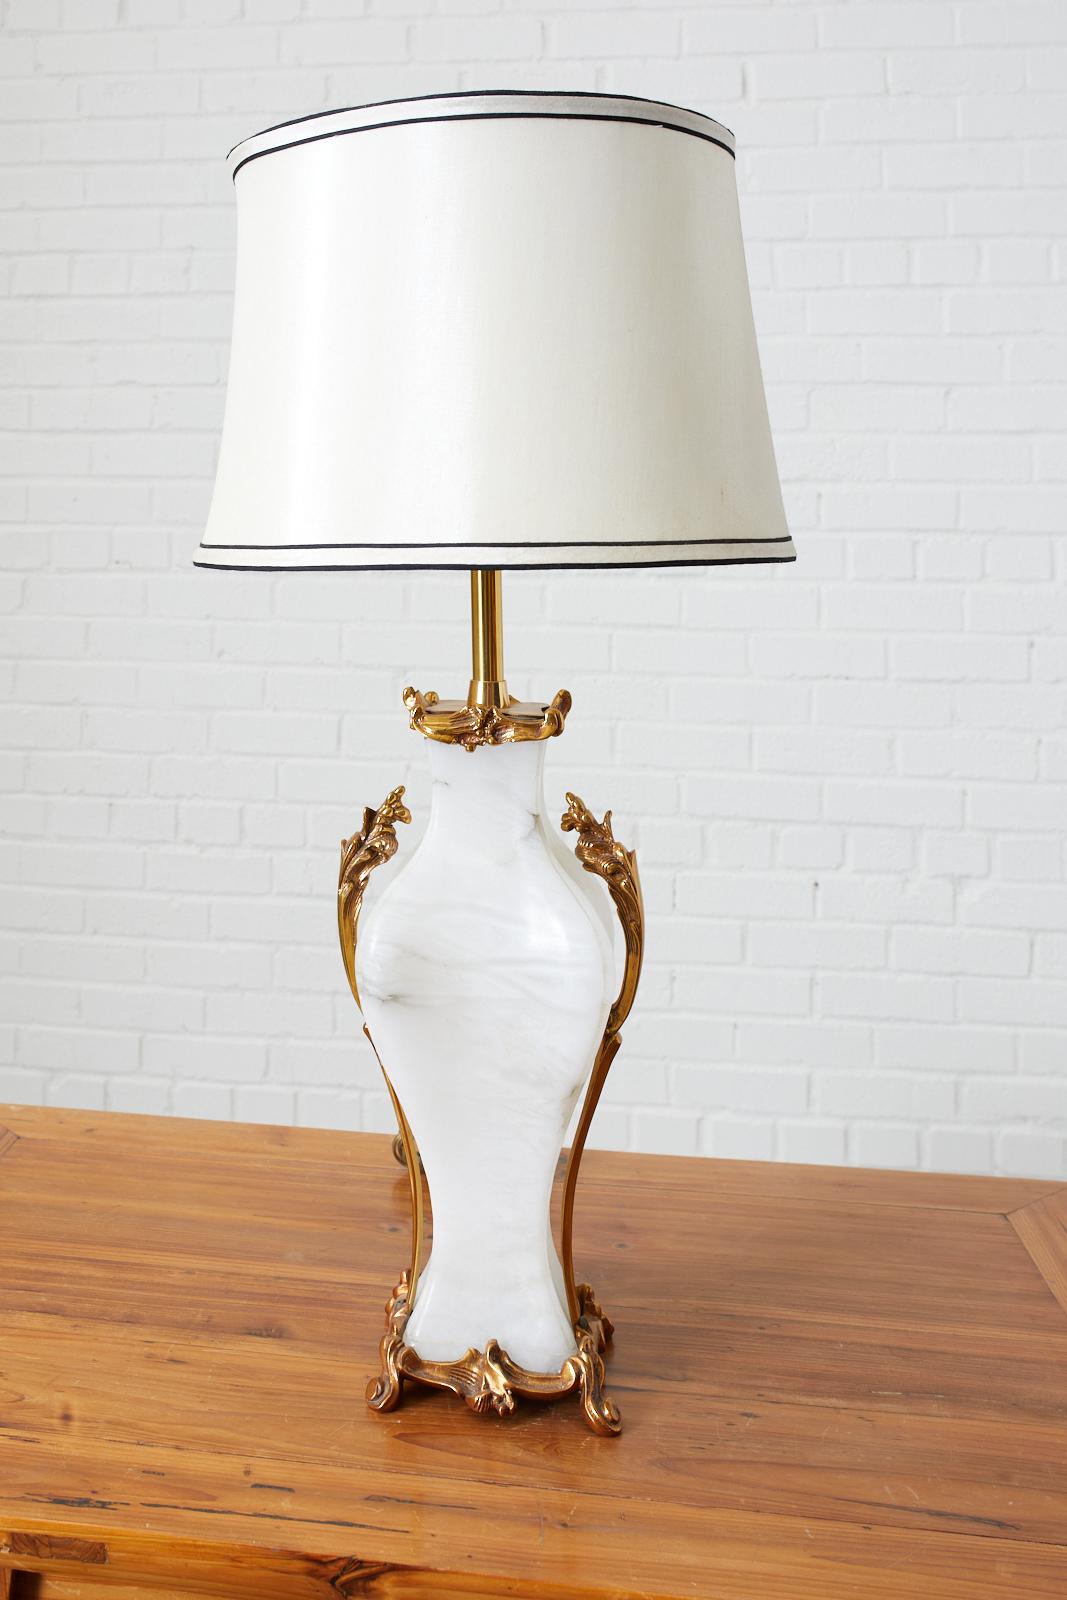 Stunning Alabaster table lamp by Marbro Lamp Company featuring a brass base tinted in rose gold with climbing acanthus and matching top. This special order lamp weighs over twenty pounds with hardware and finial. The lamp has been stamped and